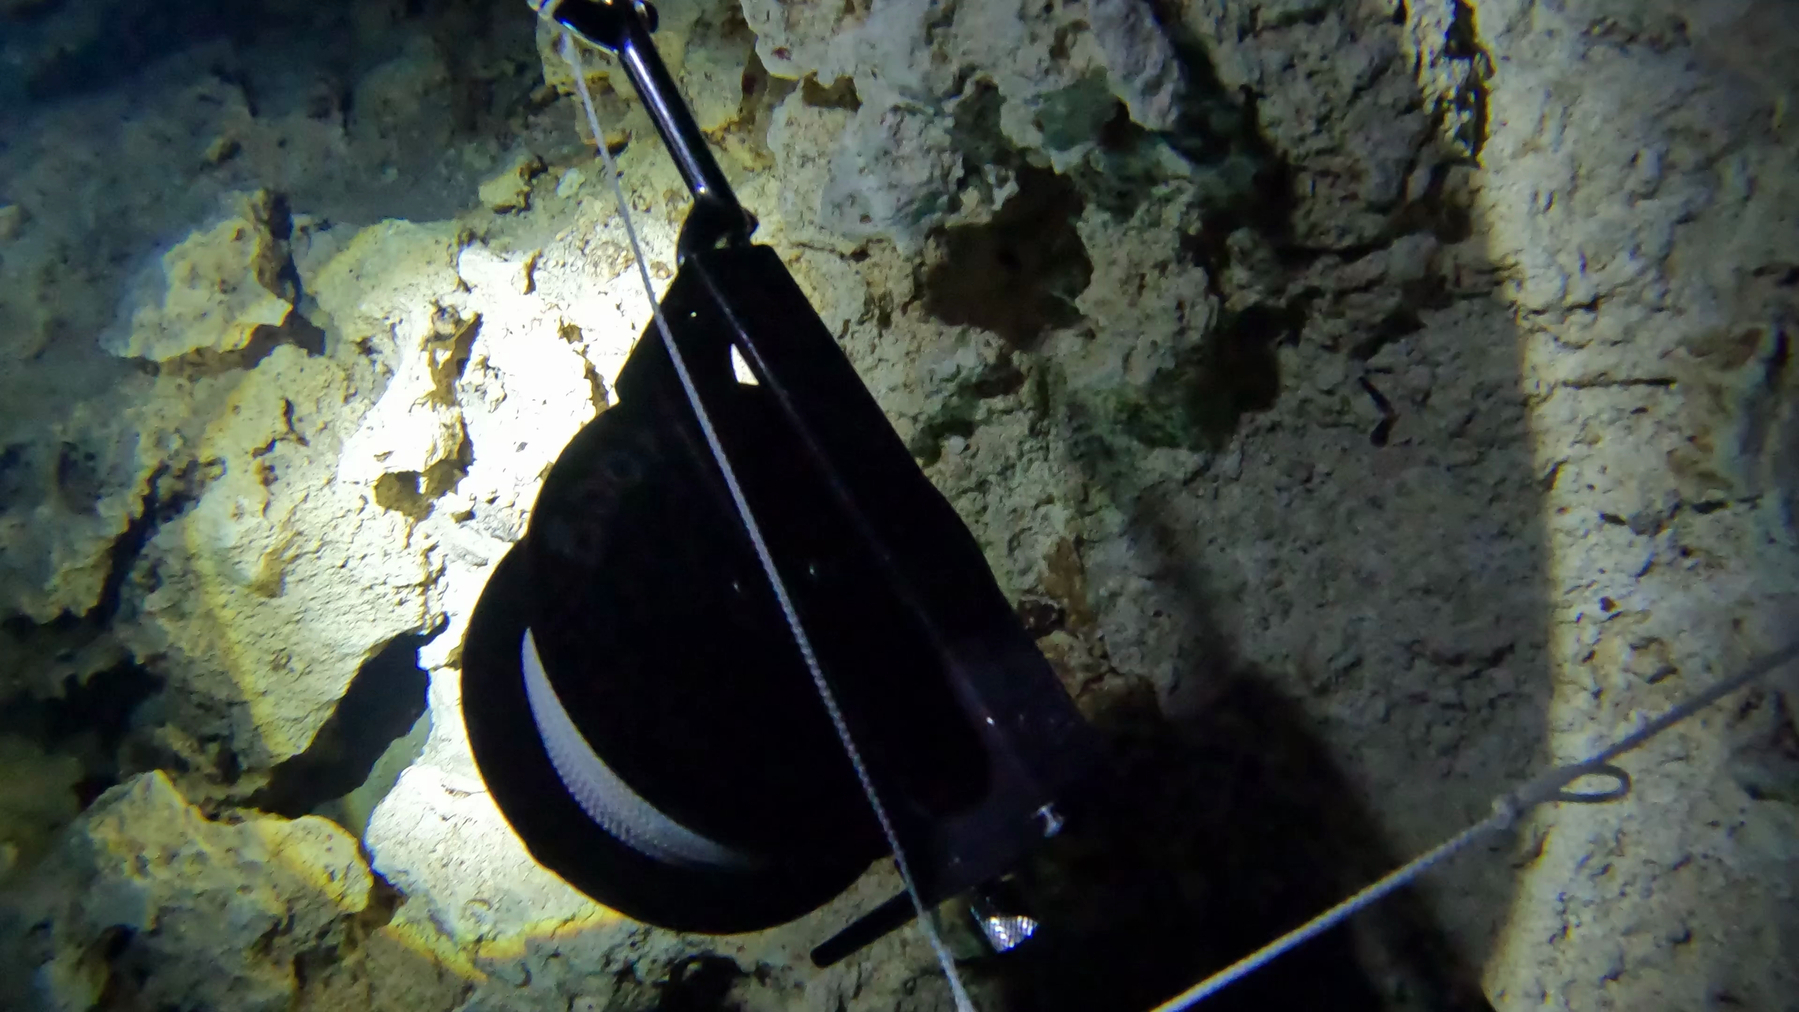 A Halycon Pathfinder guideline reel securely tied into the main line of an underwater cave system.